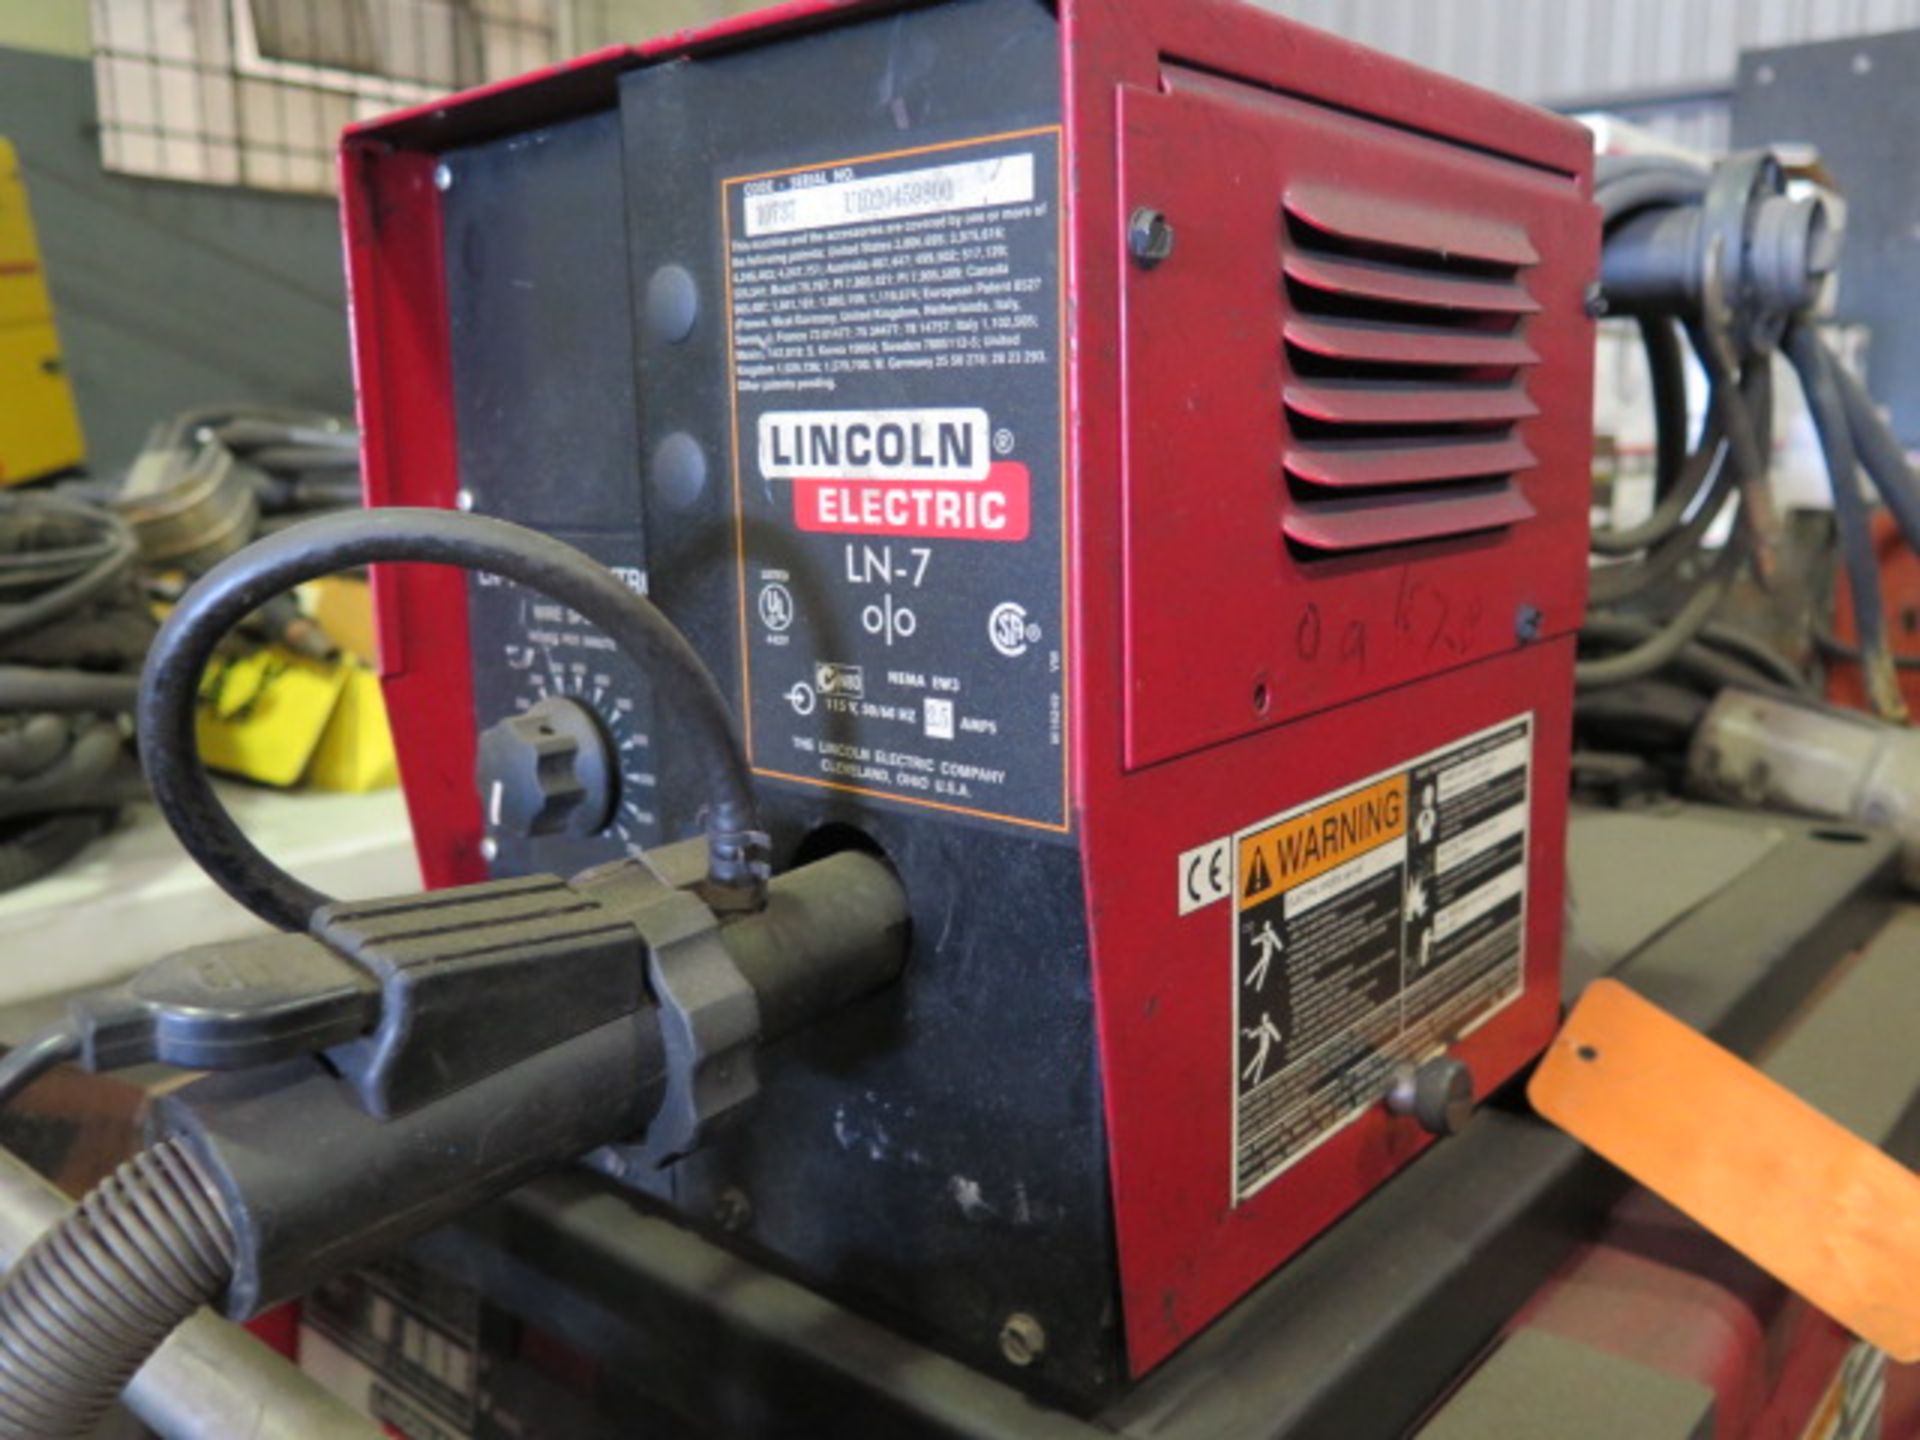 Lincoln CV-300 Arc Welding Power Source w/ Lincoln LN-7 Wire Feed (SOLD AS-IS - NO WARRANTY) - Image 4 of 7